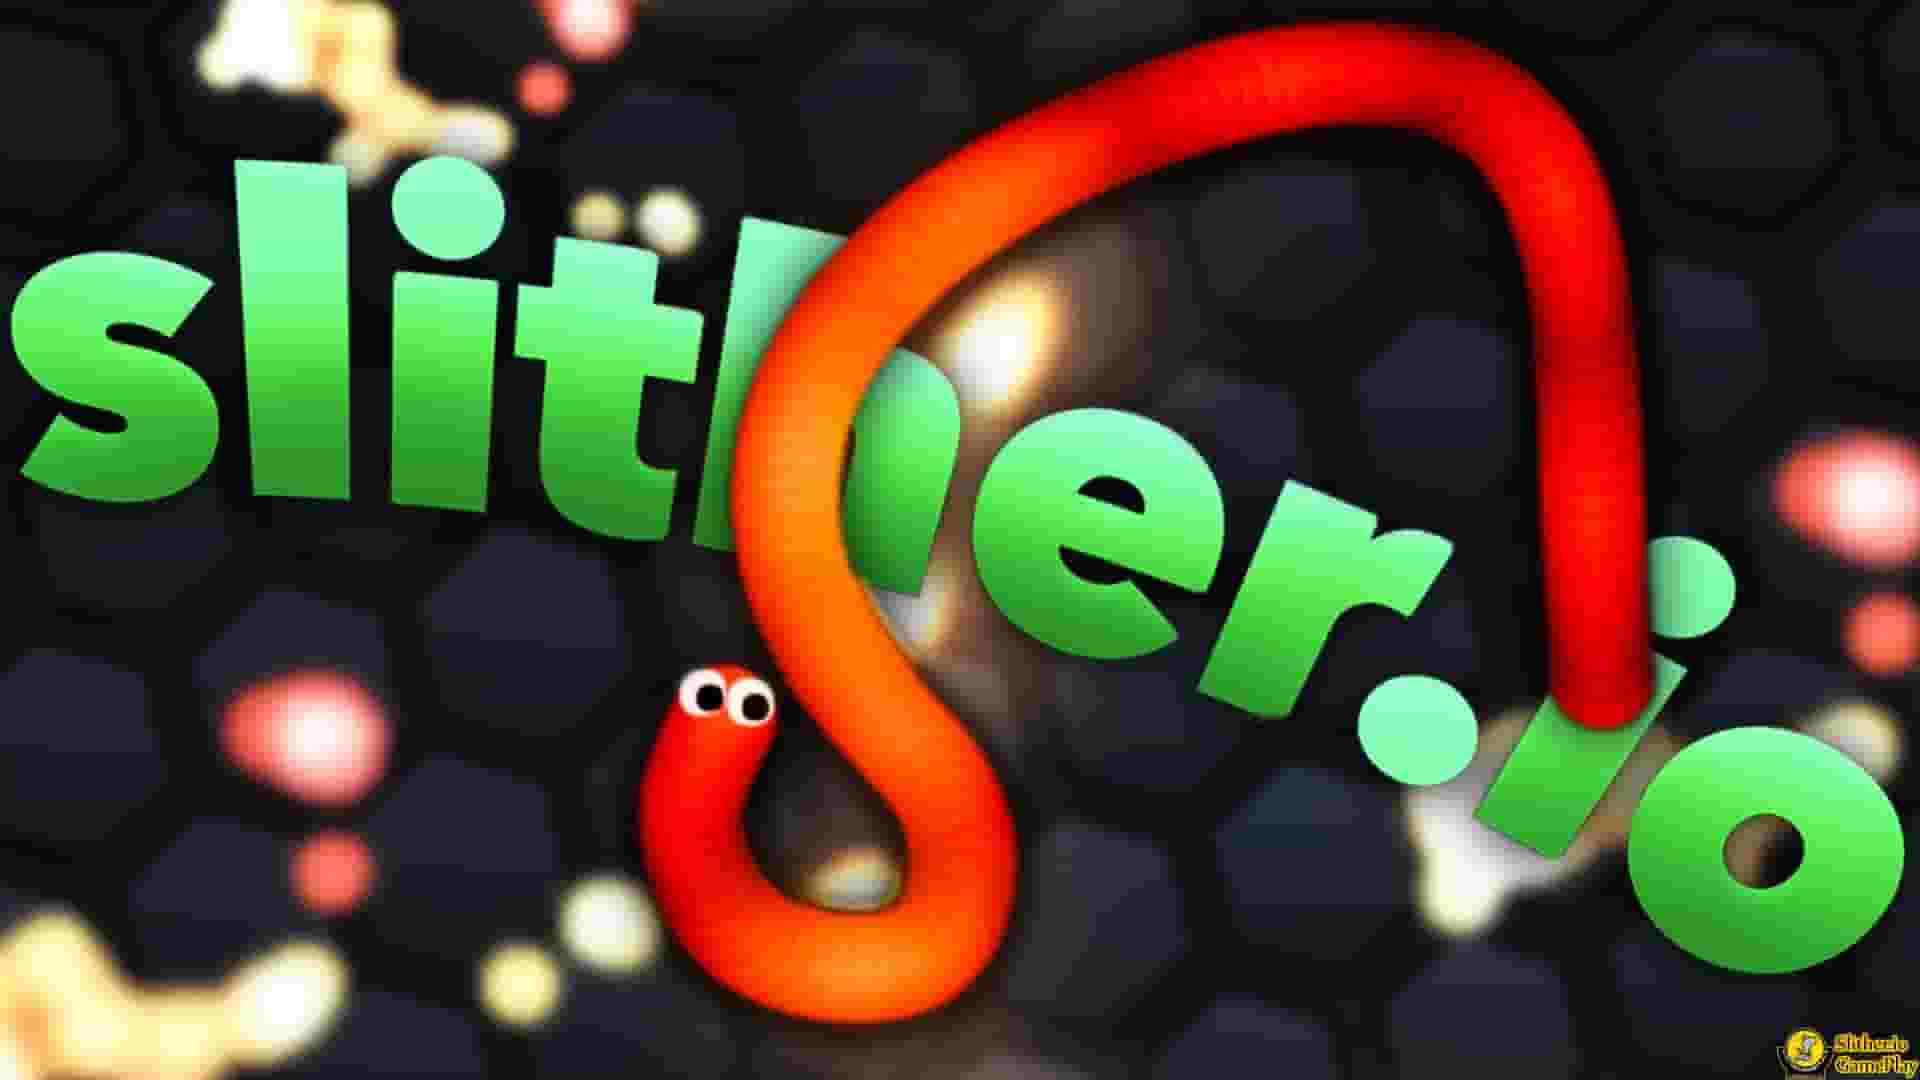 Slither Backgrounds, Compatible - PC, Mobile, Gadgets| 1920x1080 px